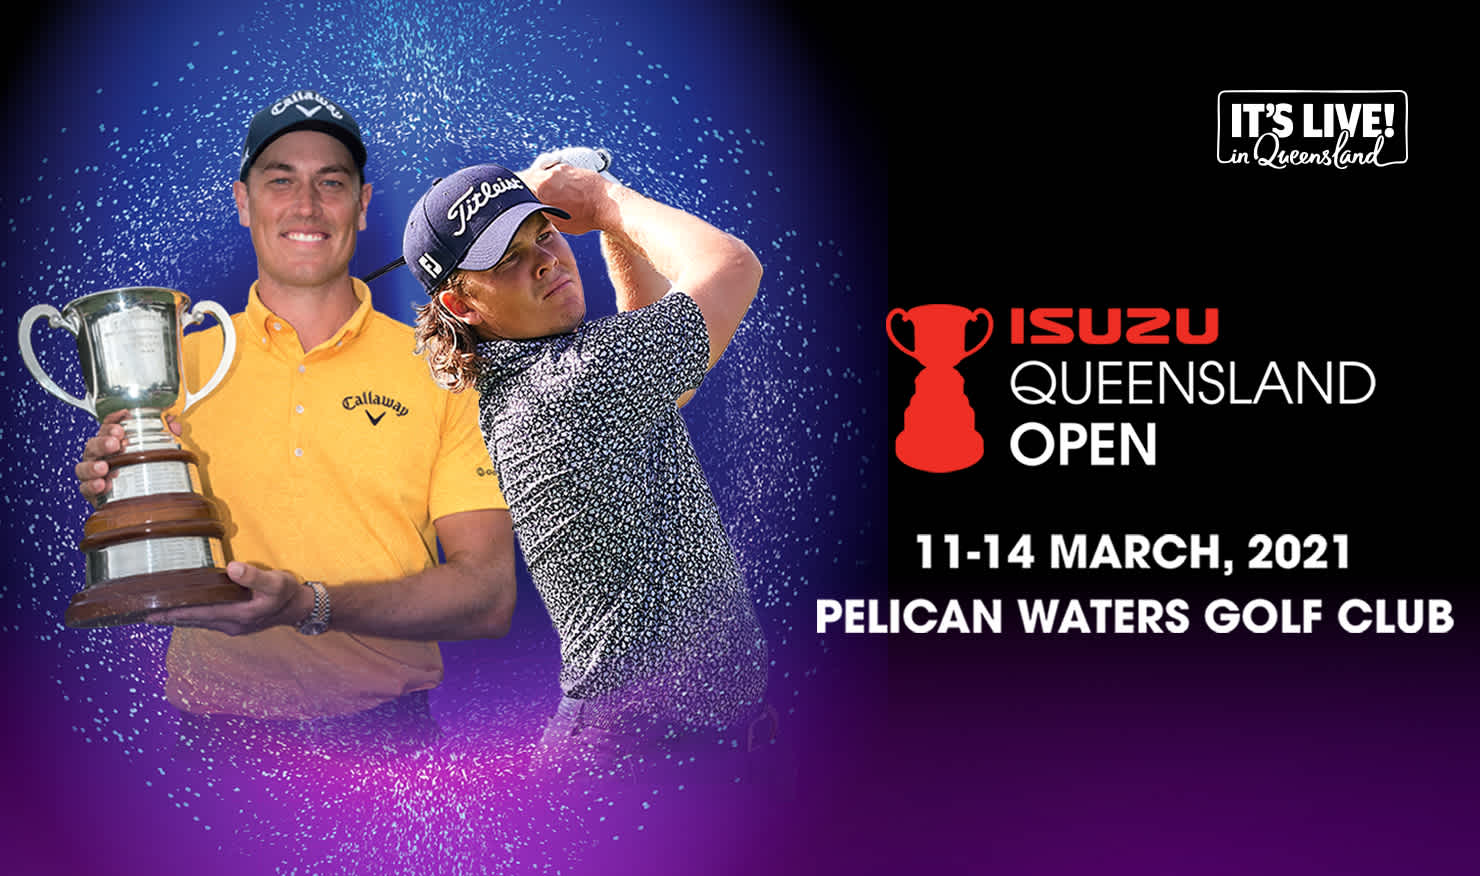 Defending champ Anthony Quayle will be joined by good mate and European Tour player Jake McLeod at next month's Isuzu Queensland Open.